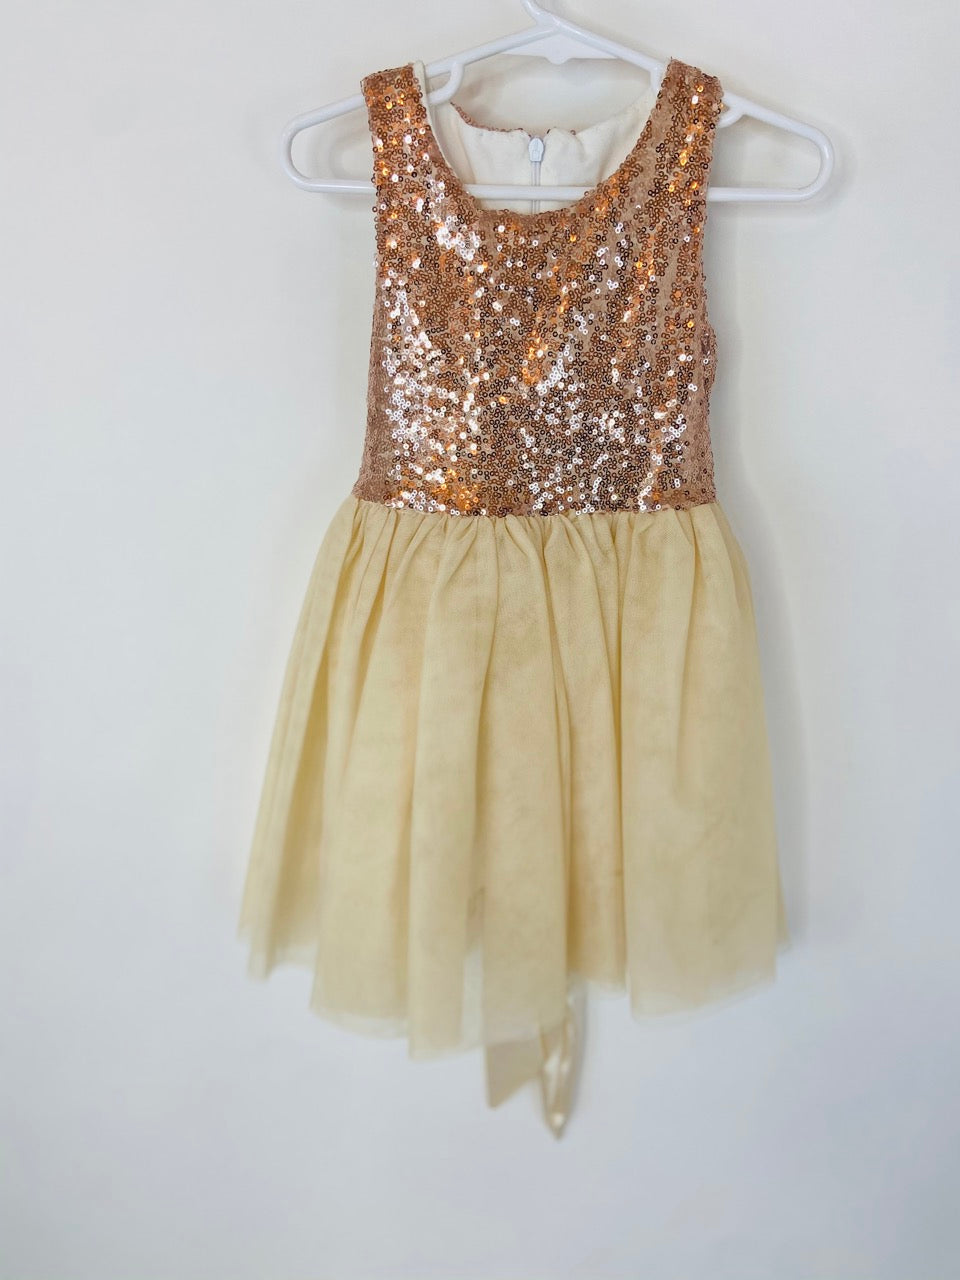 Rose Sequence Dress- XS (2T/3T)